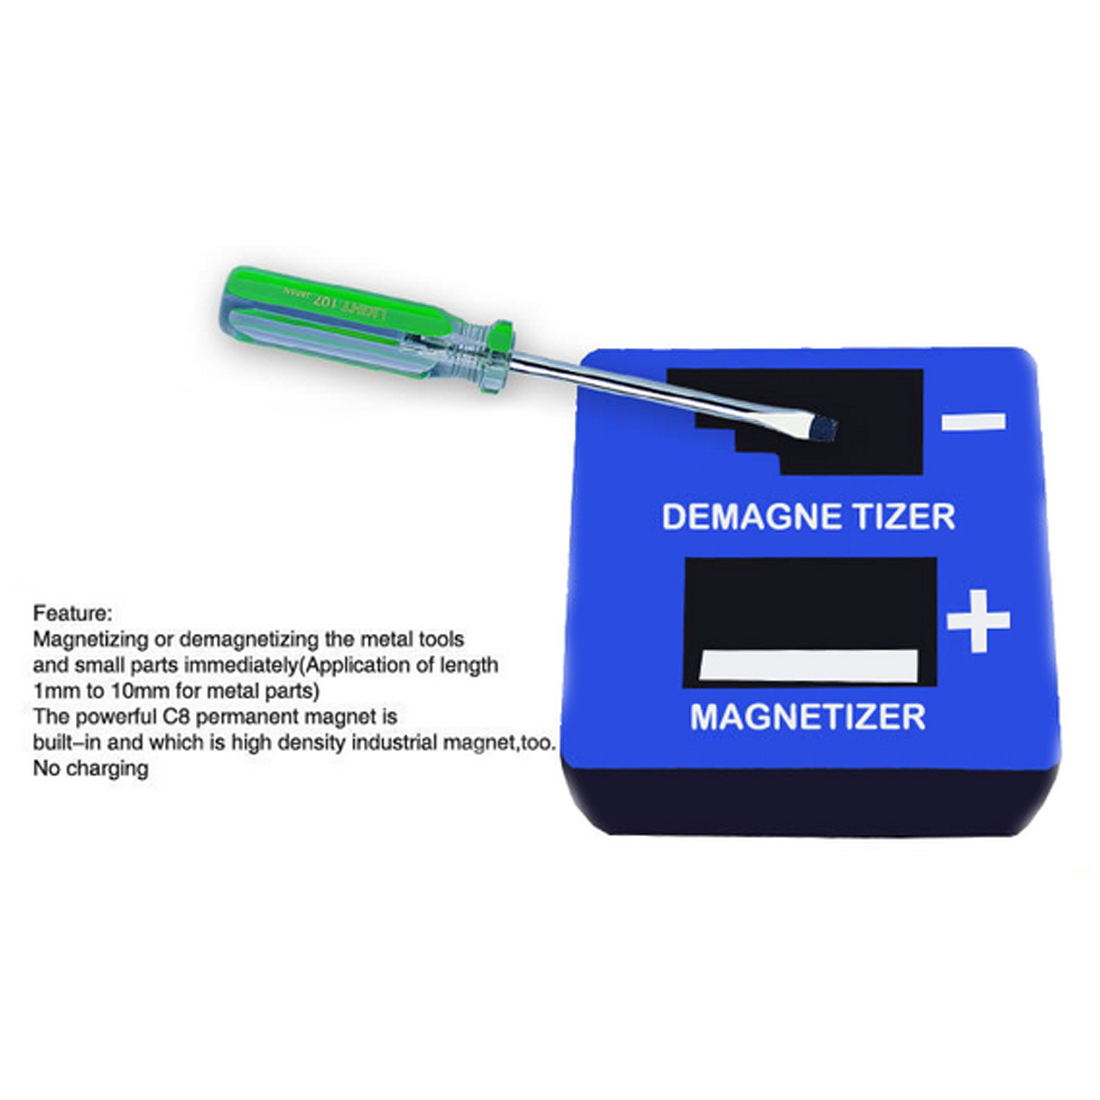 Professional Magnetizer Demagnetizer Magnetic Tool for Screwdriver Tips Screw Bits Practical Small Tools